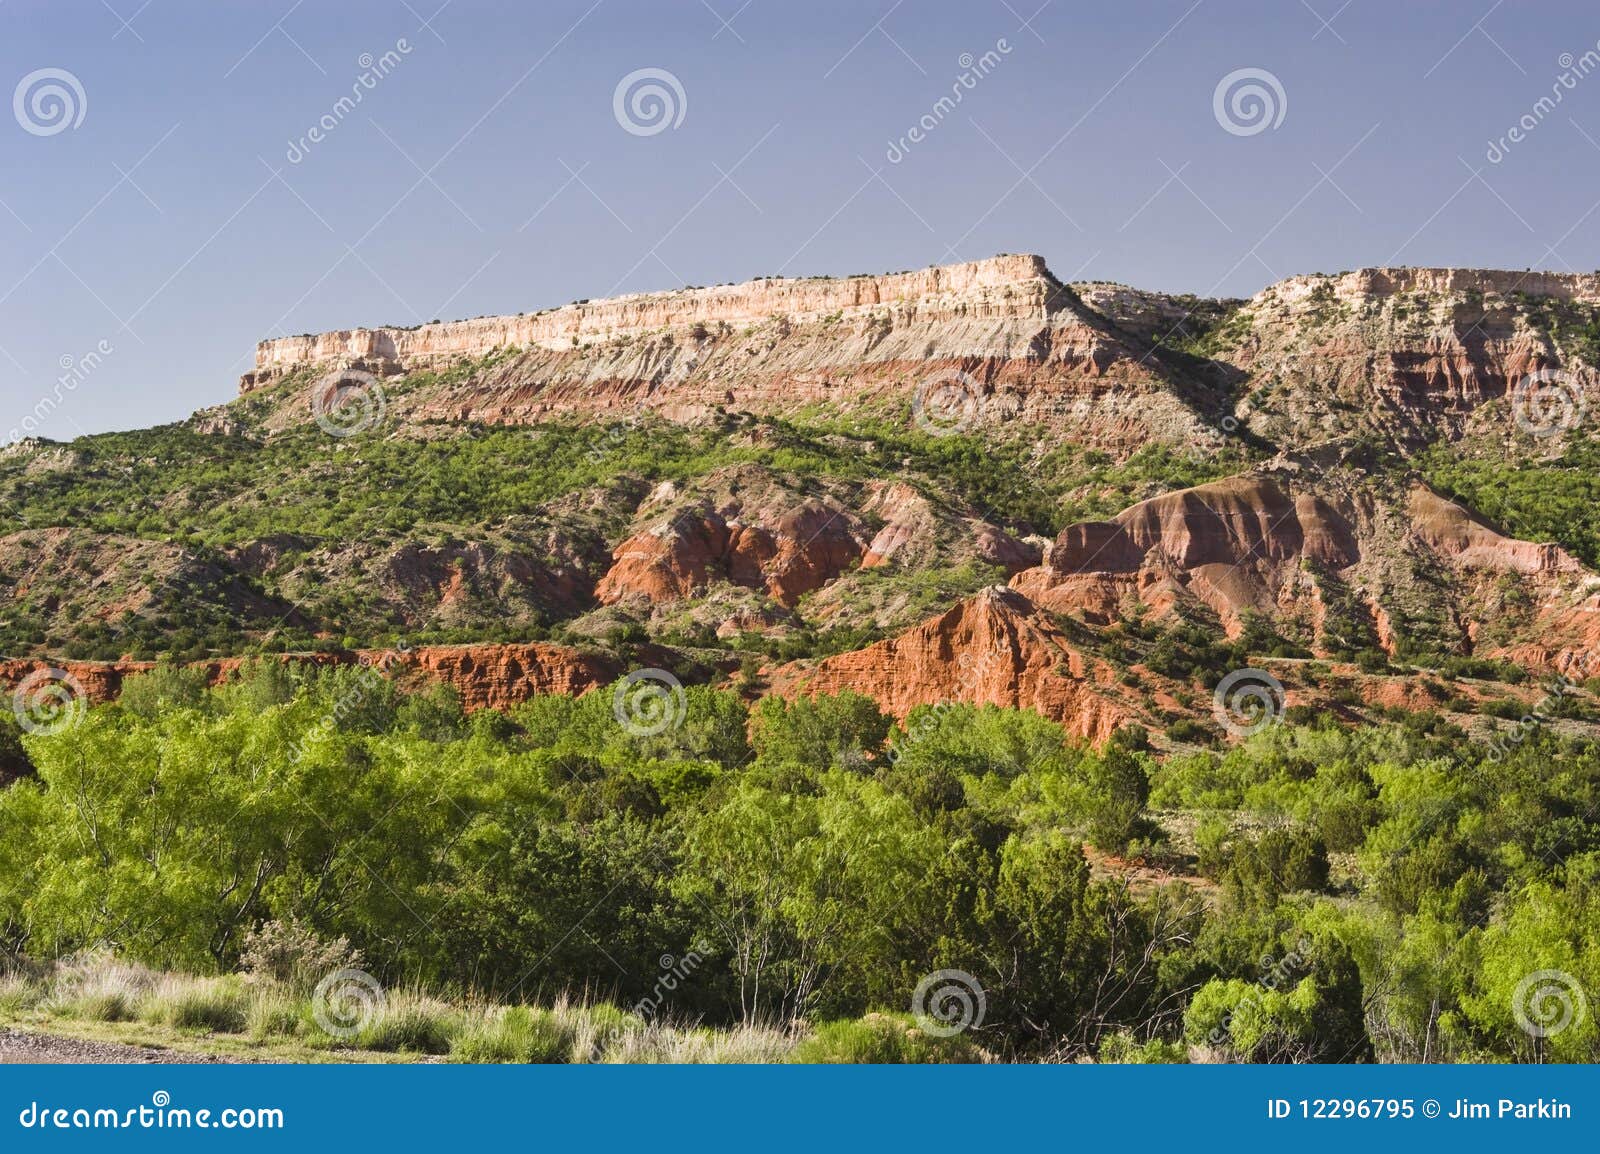 fortress cliffs in palo duro canyon